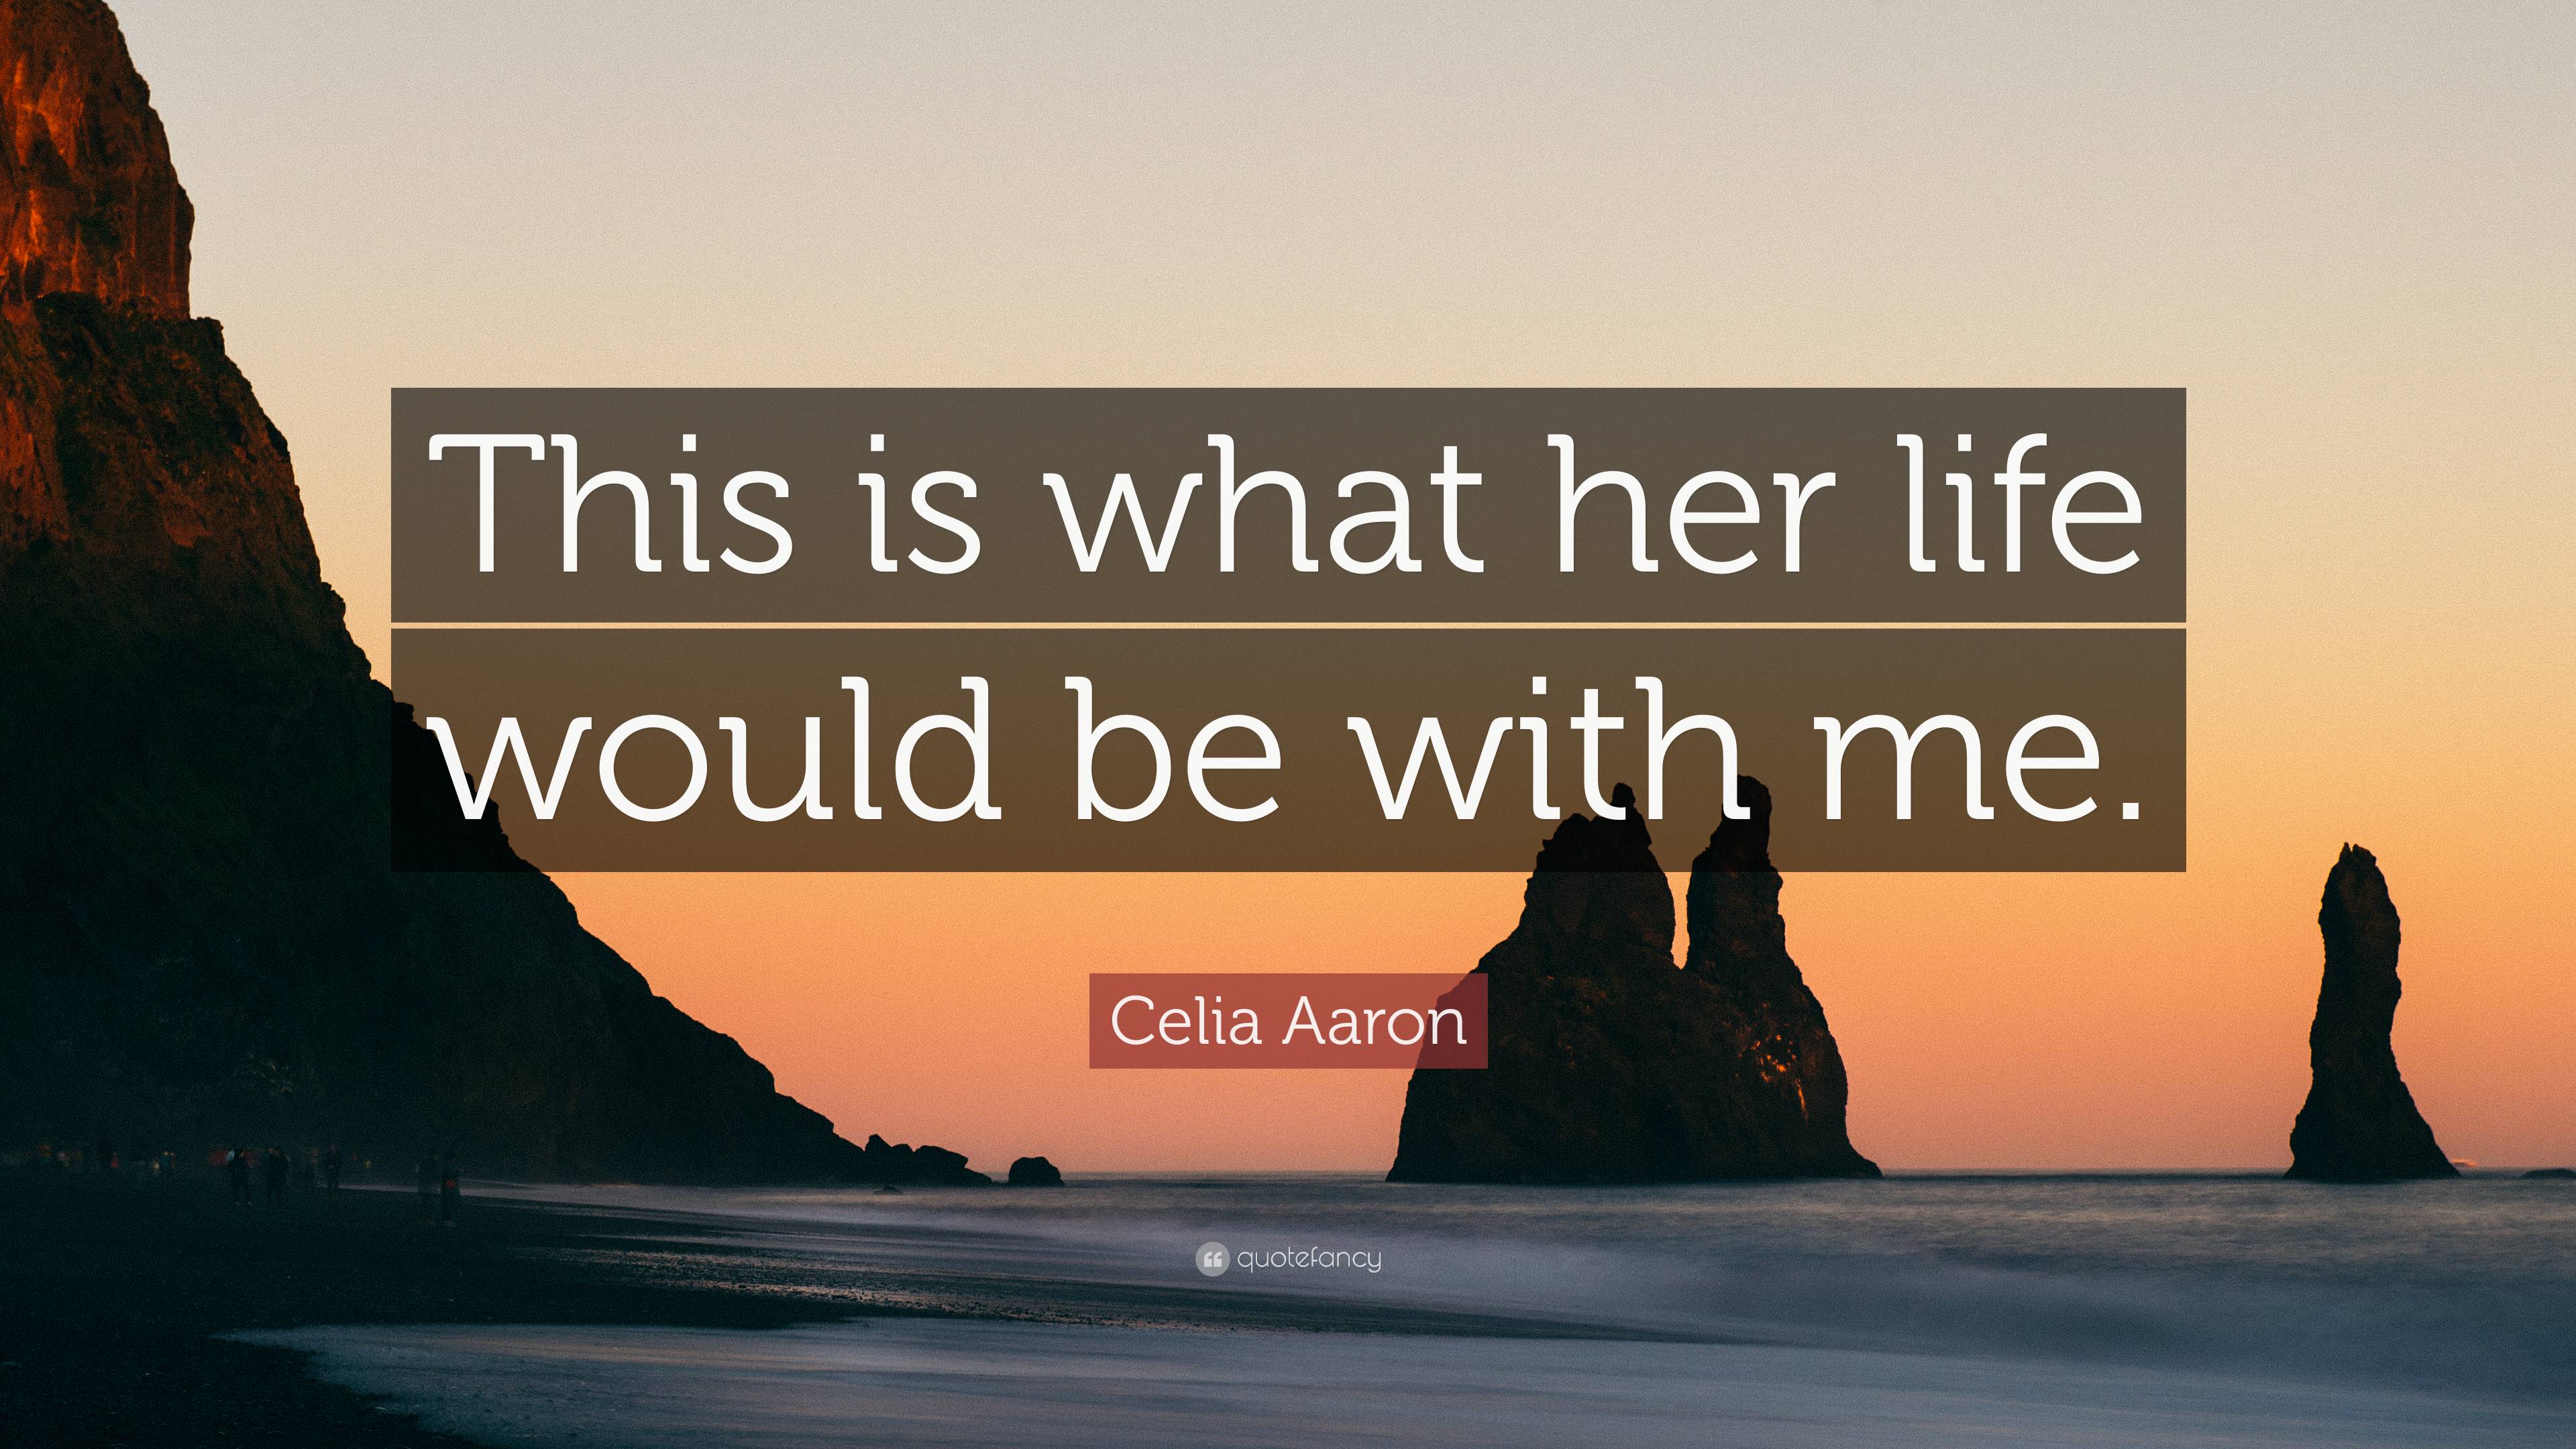 Celia Aaron Quote: “This is what her life would be with me.”